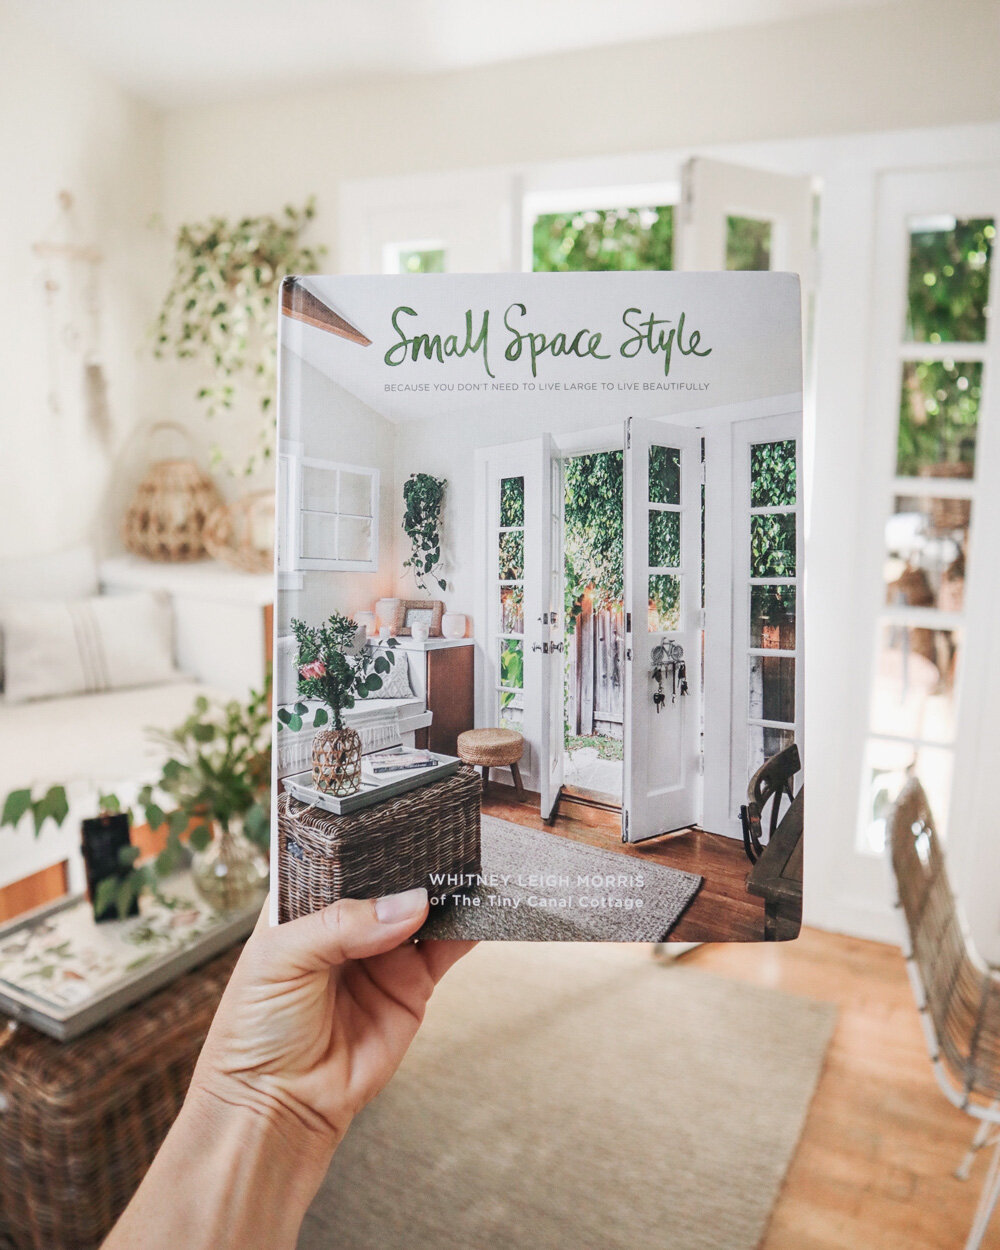 Small Space Style: Because You Don't Need to Live Large to Live Beautifully  by Whitney Leigh Morris, Hardcover